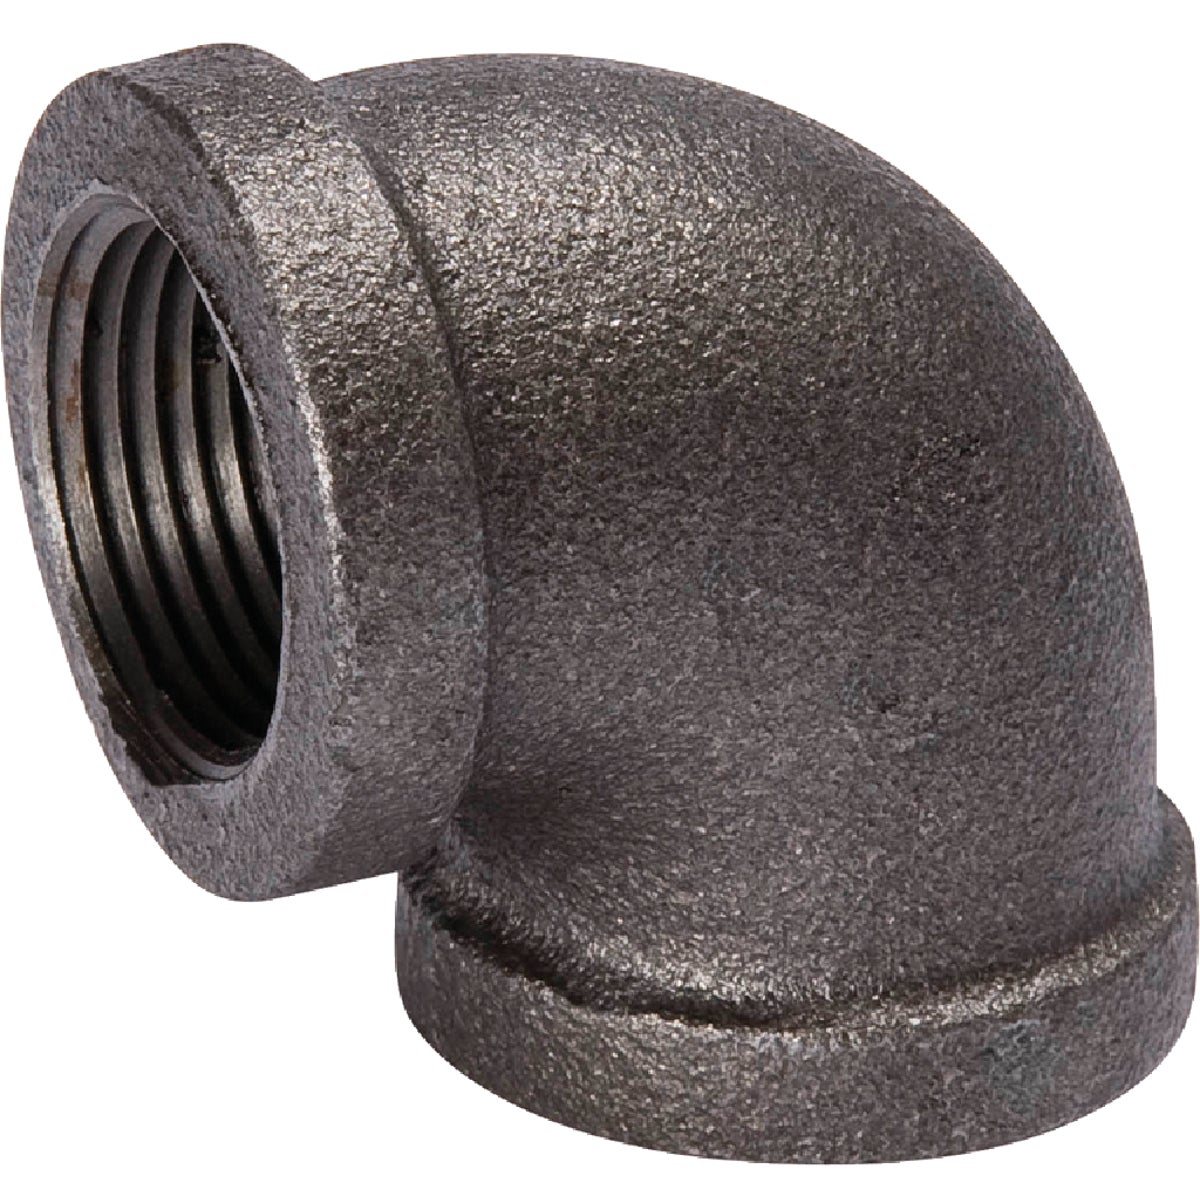 Southland 1-1/2 In. 90 Deg. Malleable Black Iron Elbow (1/4 Bend)